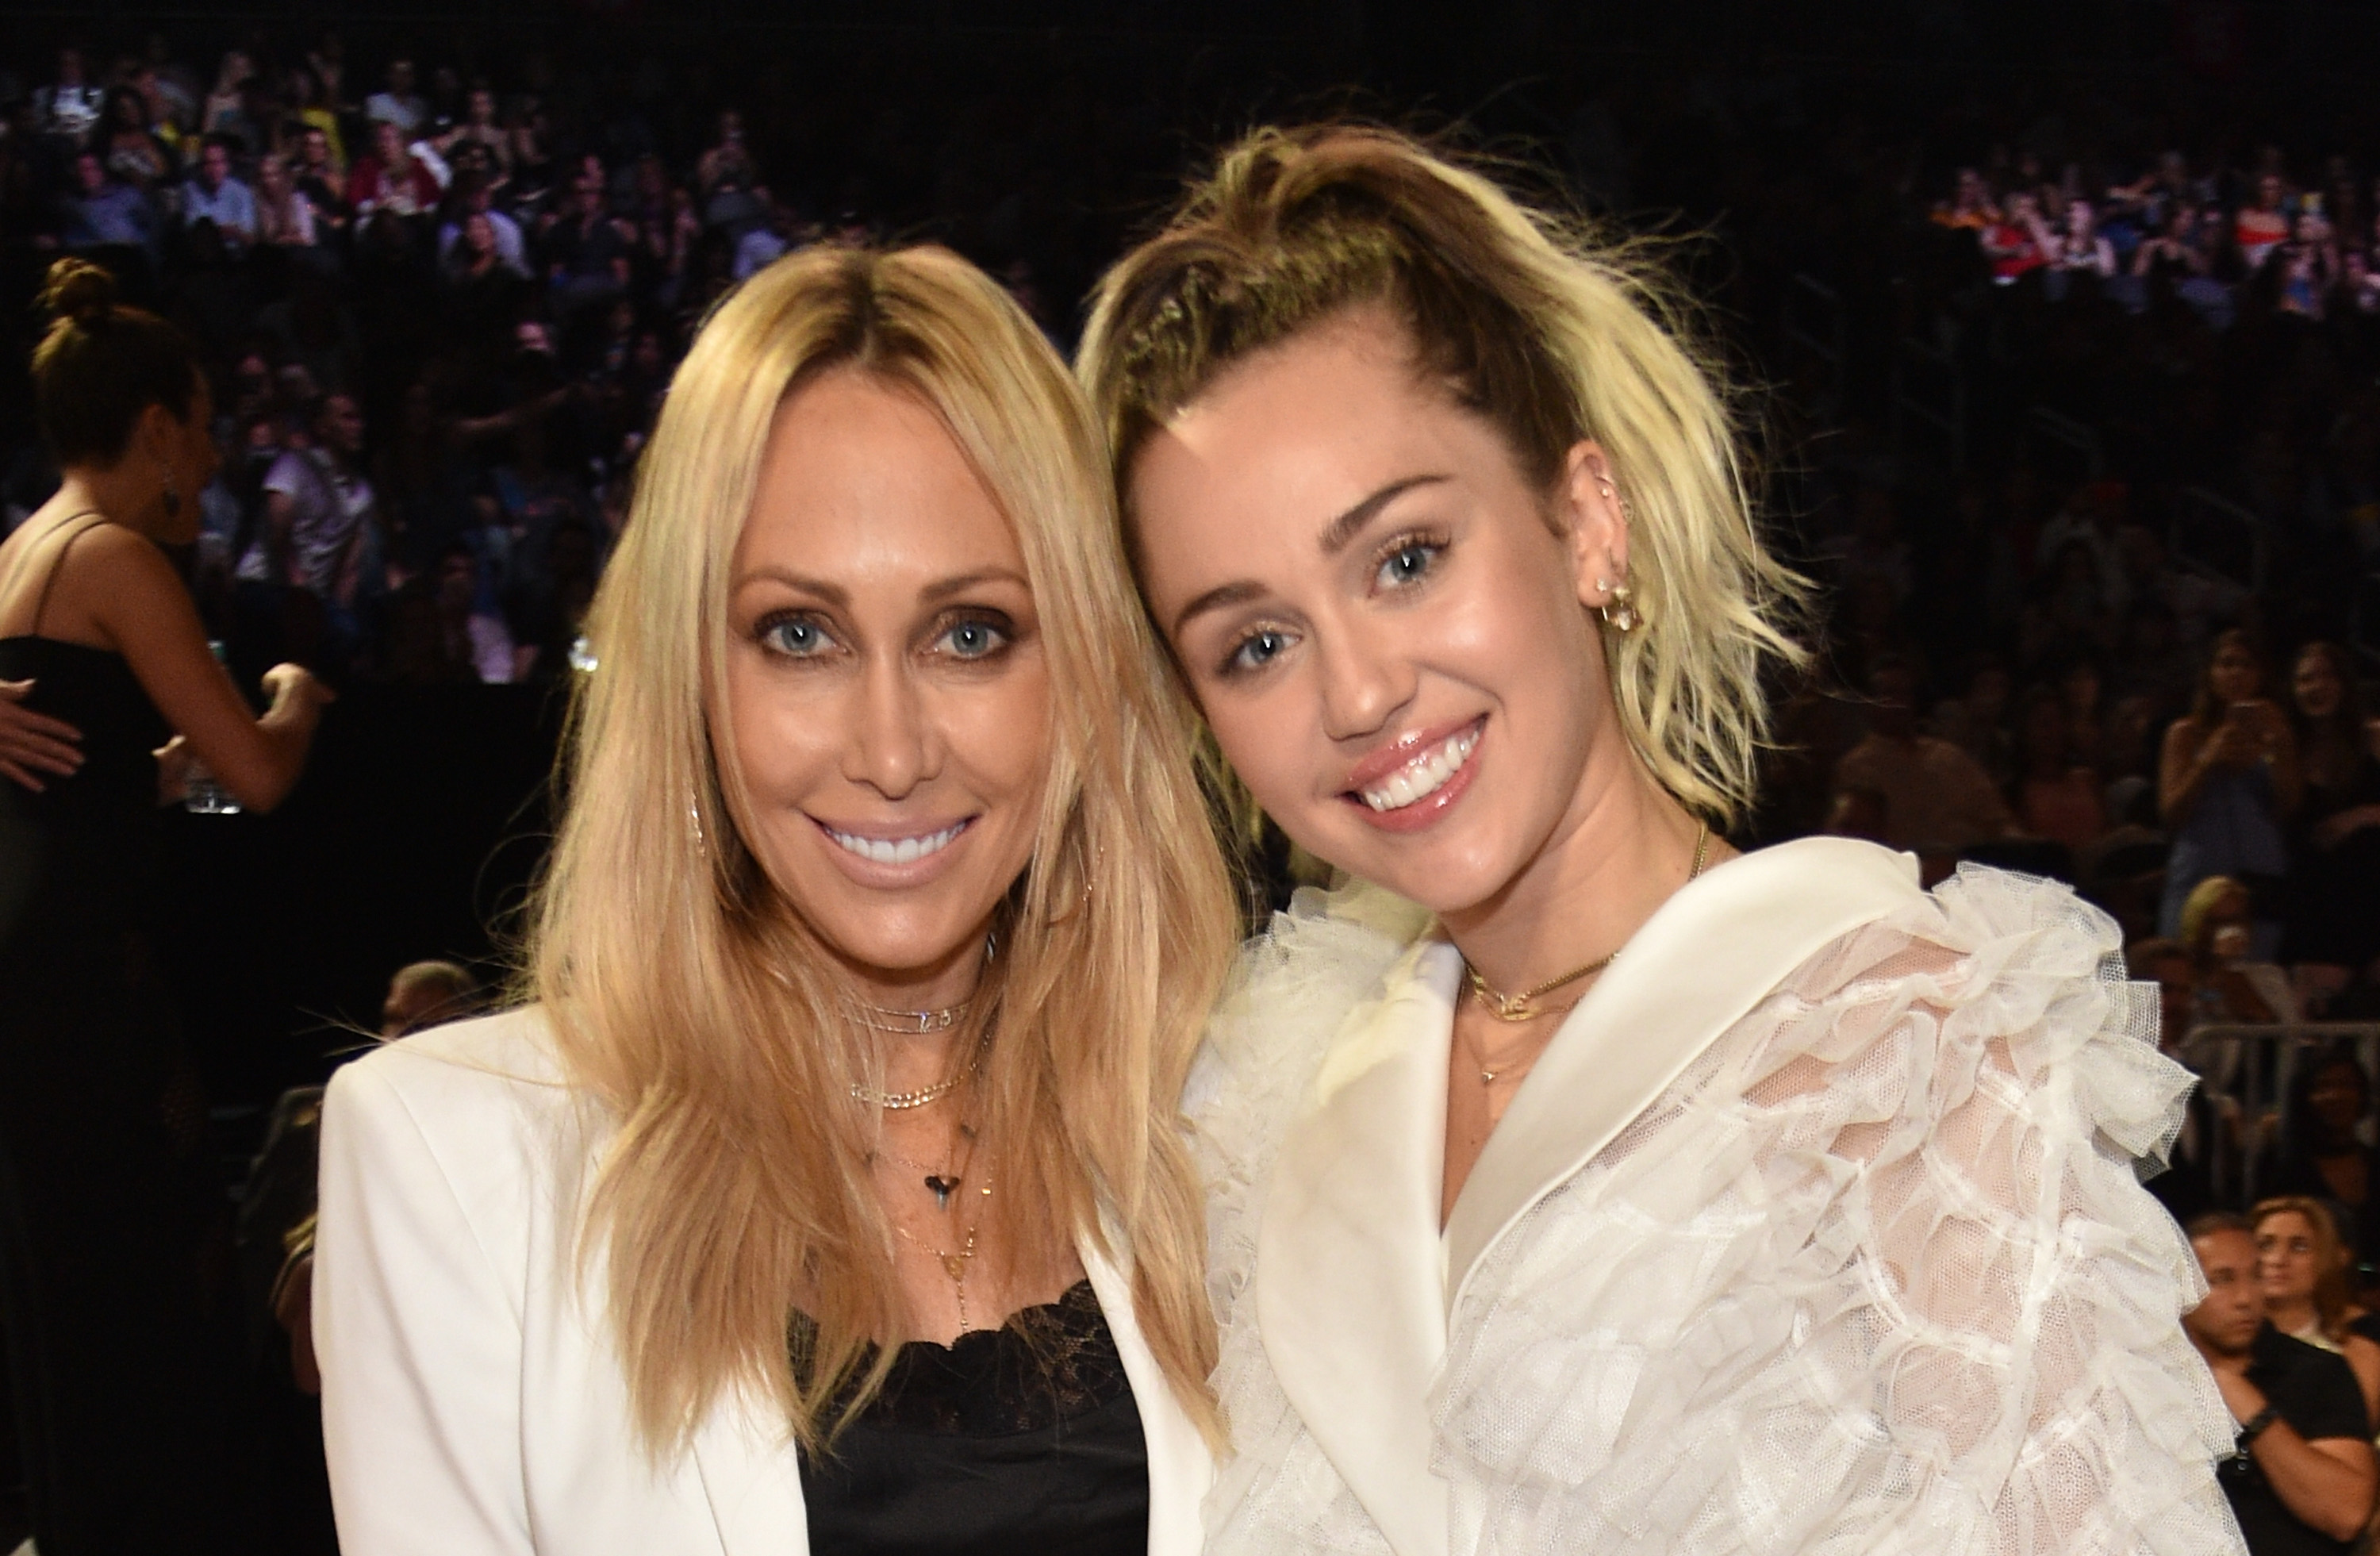 Tish Cyrus (L) and Miley Cyrus attend the 2017 Billboard Music Awards on May 21, 2017 in Las Vegas, Nevada.